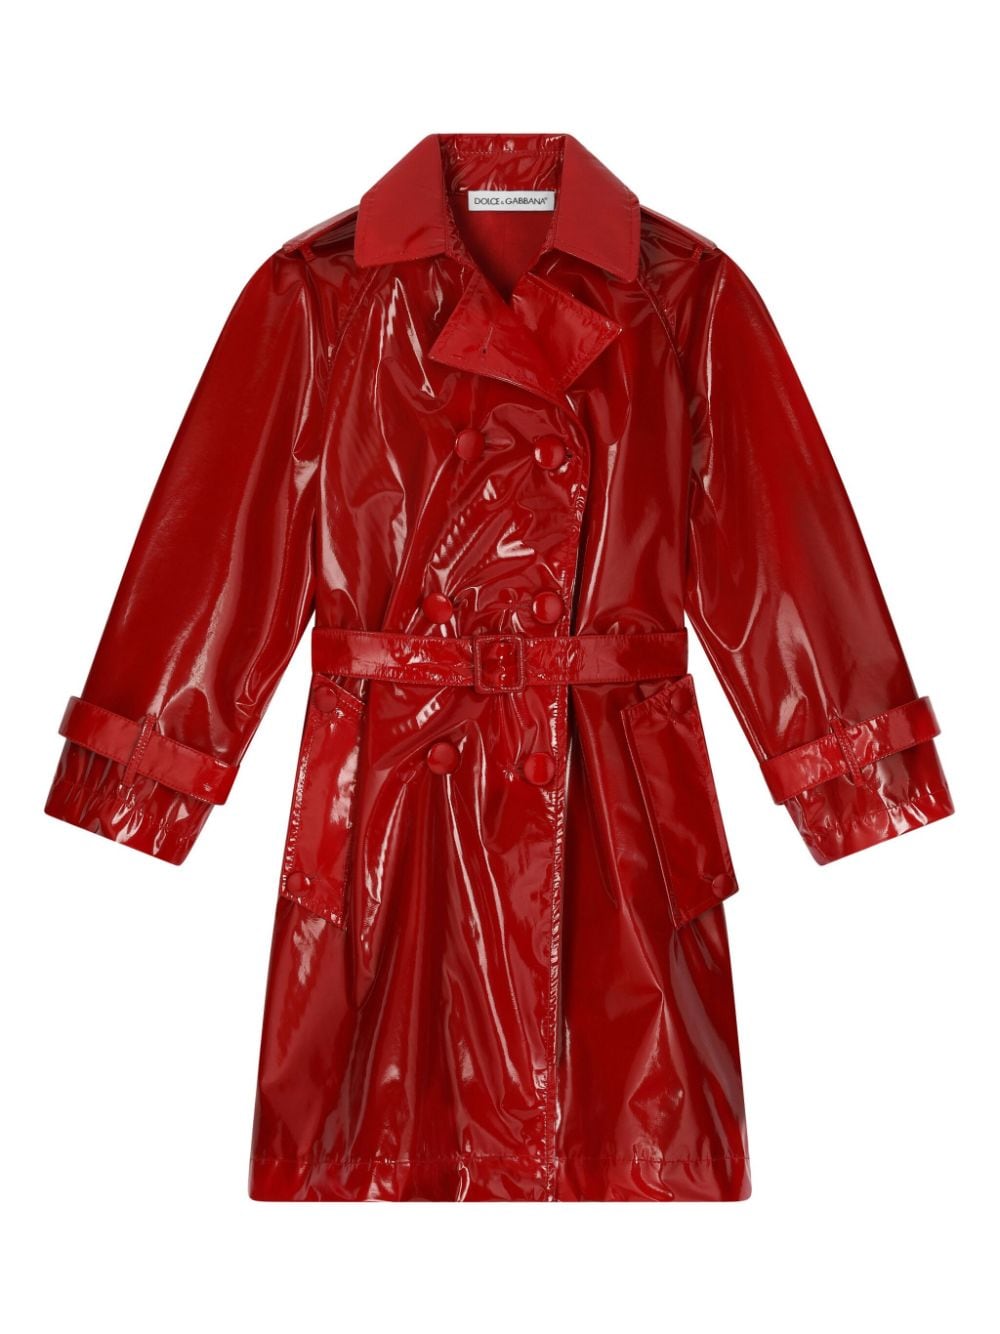 Dolce & Gabbana Kids double-breasted belted trench coat - Red von Dolce & Gabbana Kids